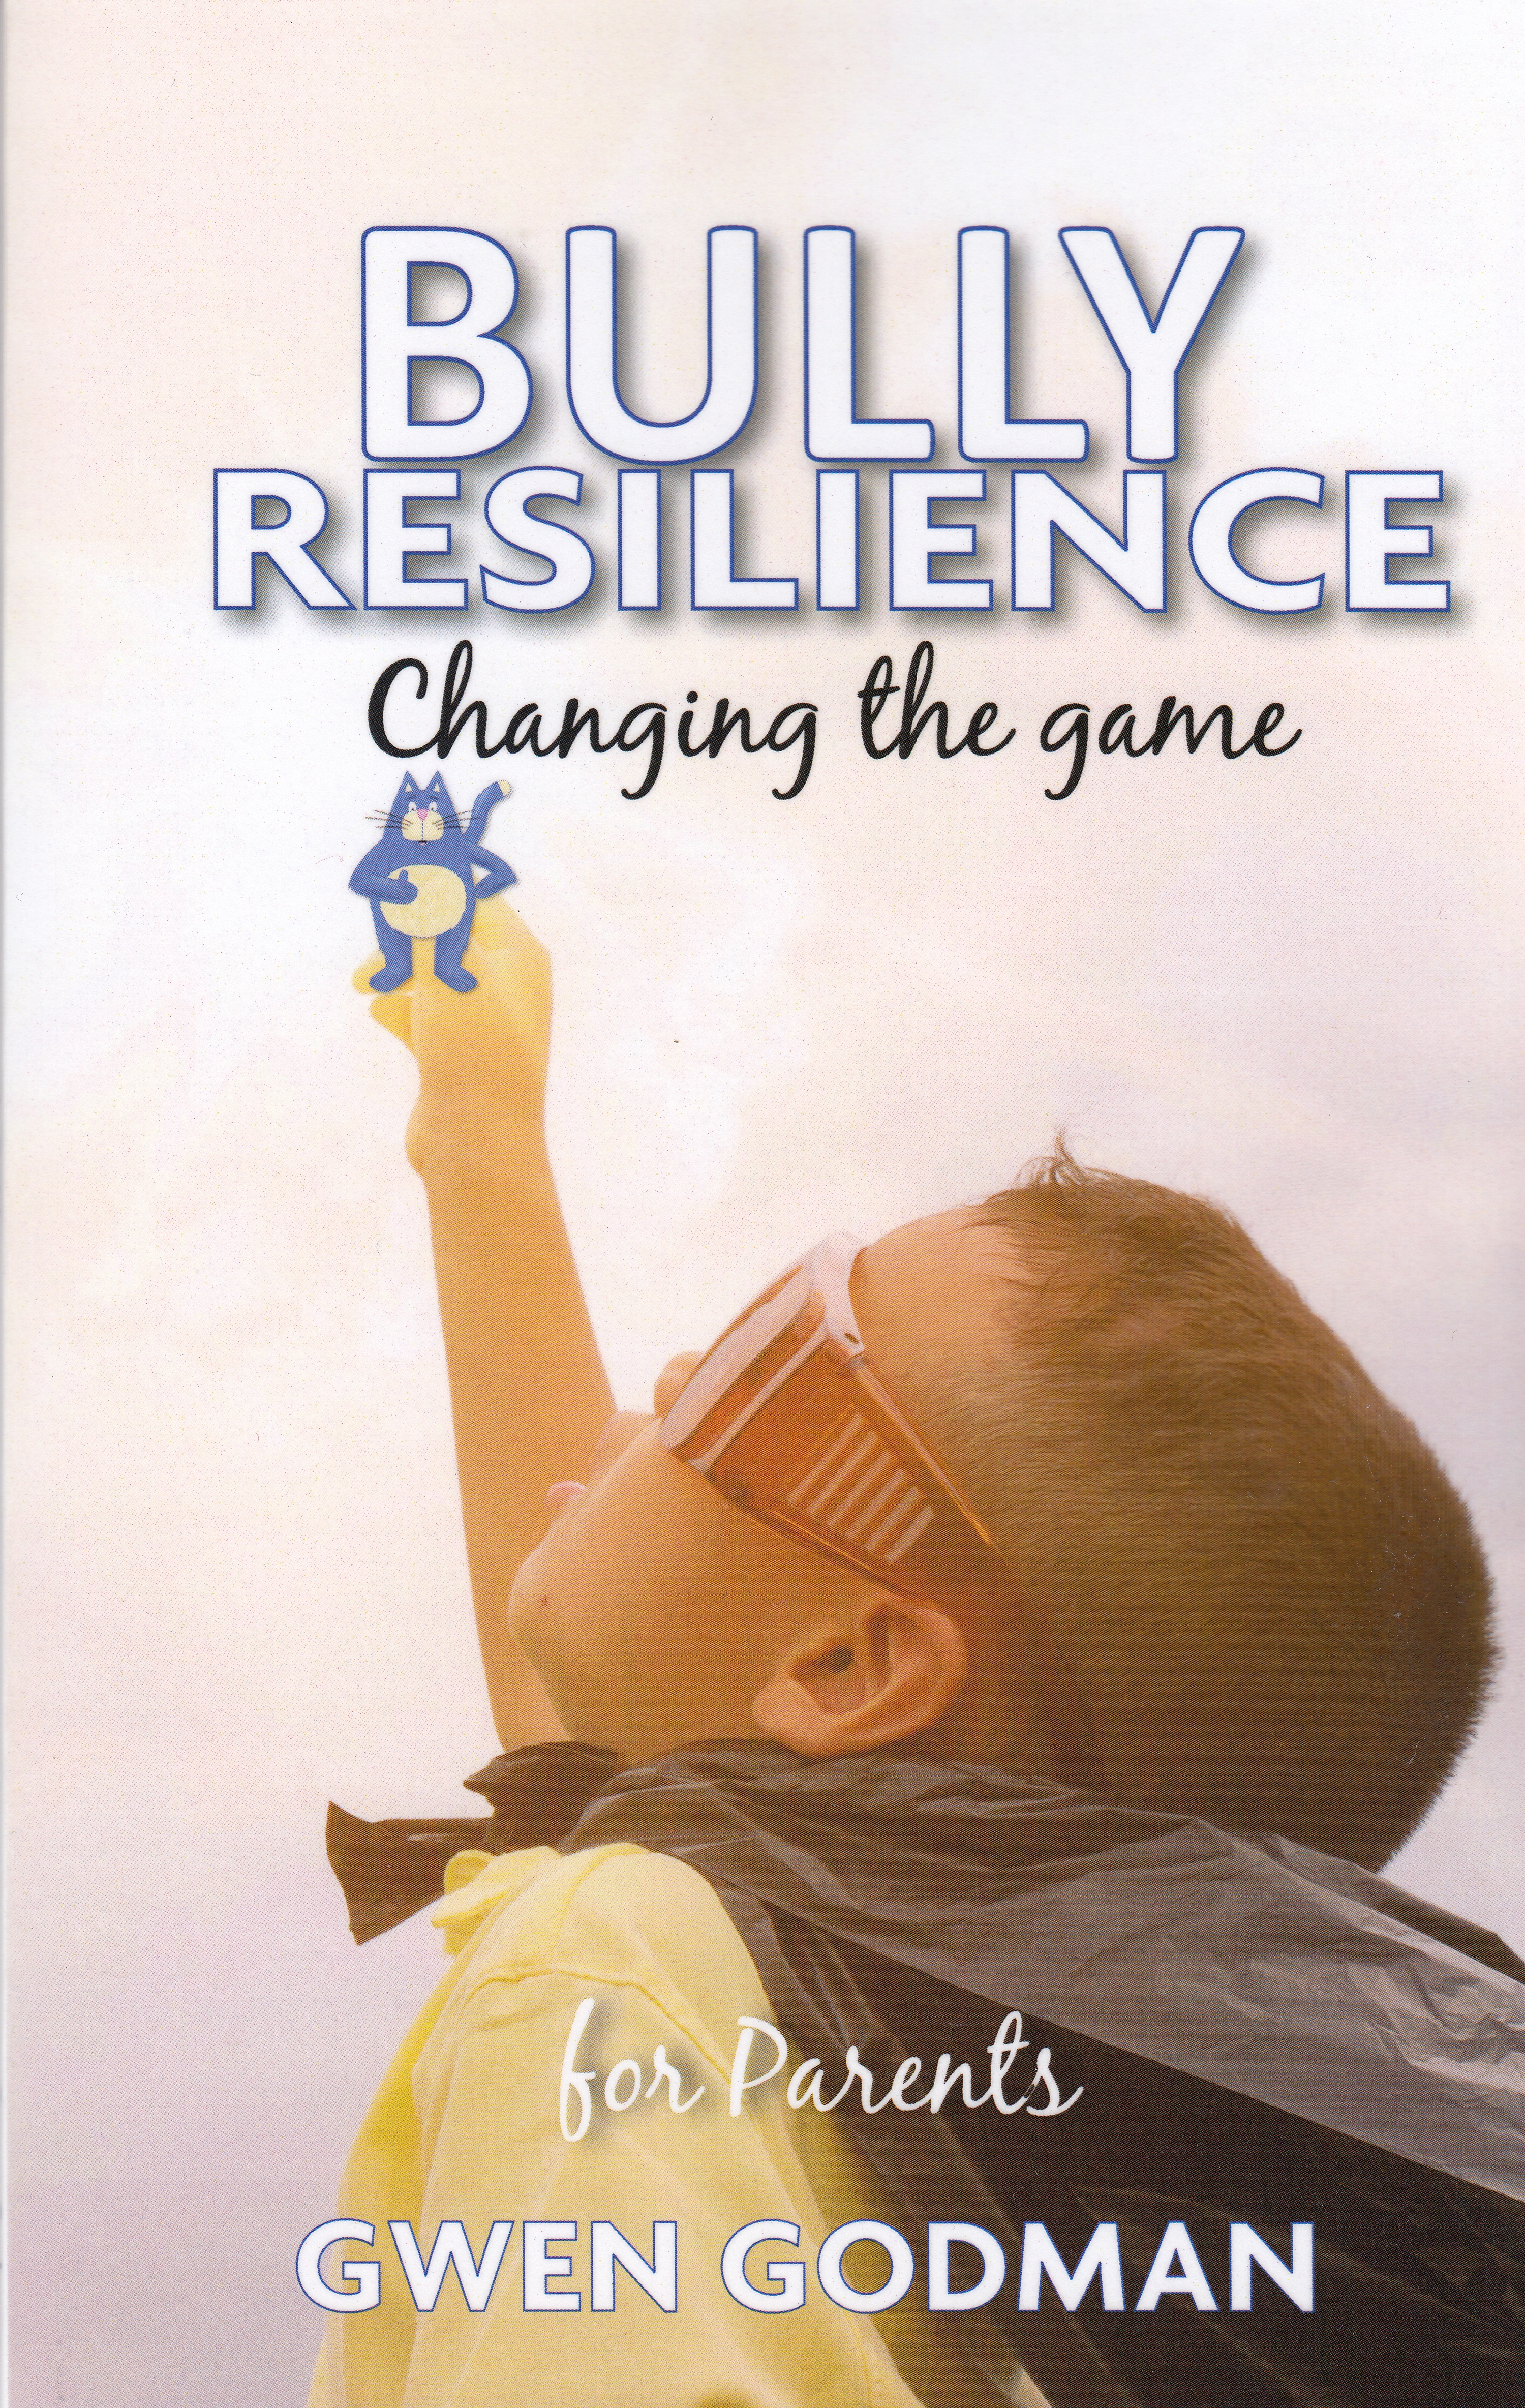 Bully Resilience; changing the game - a parents guide